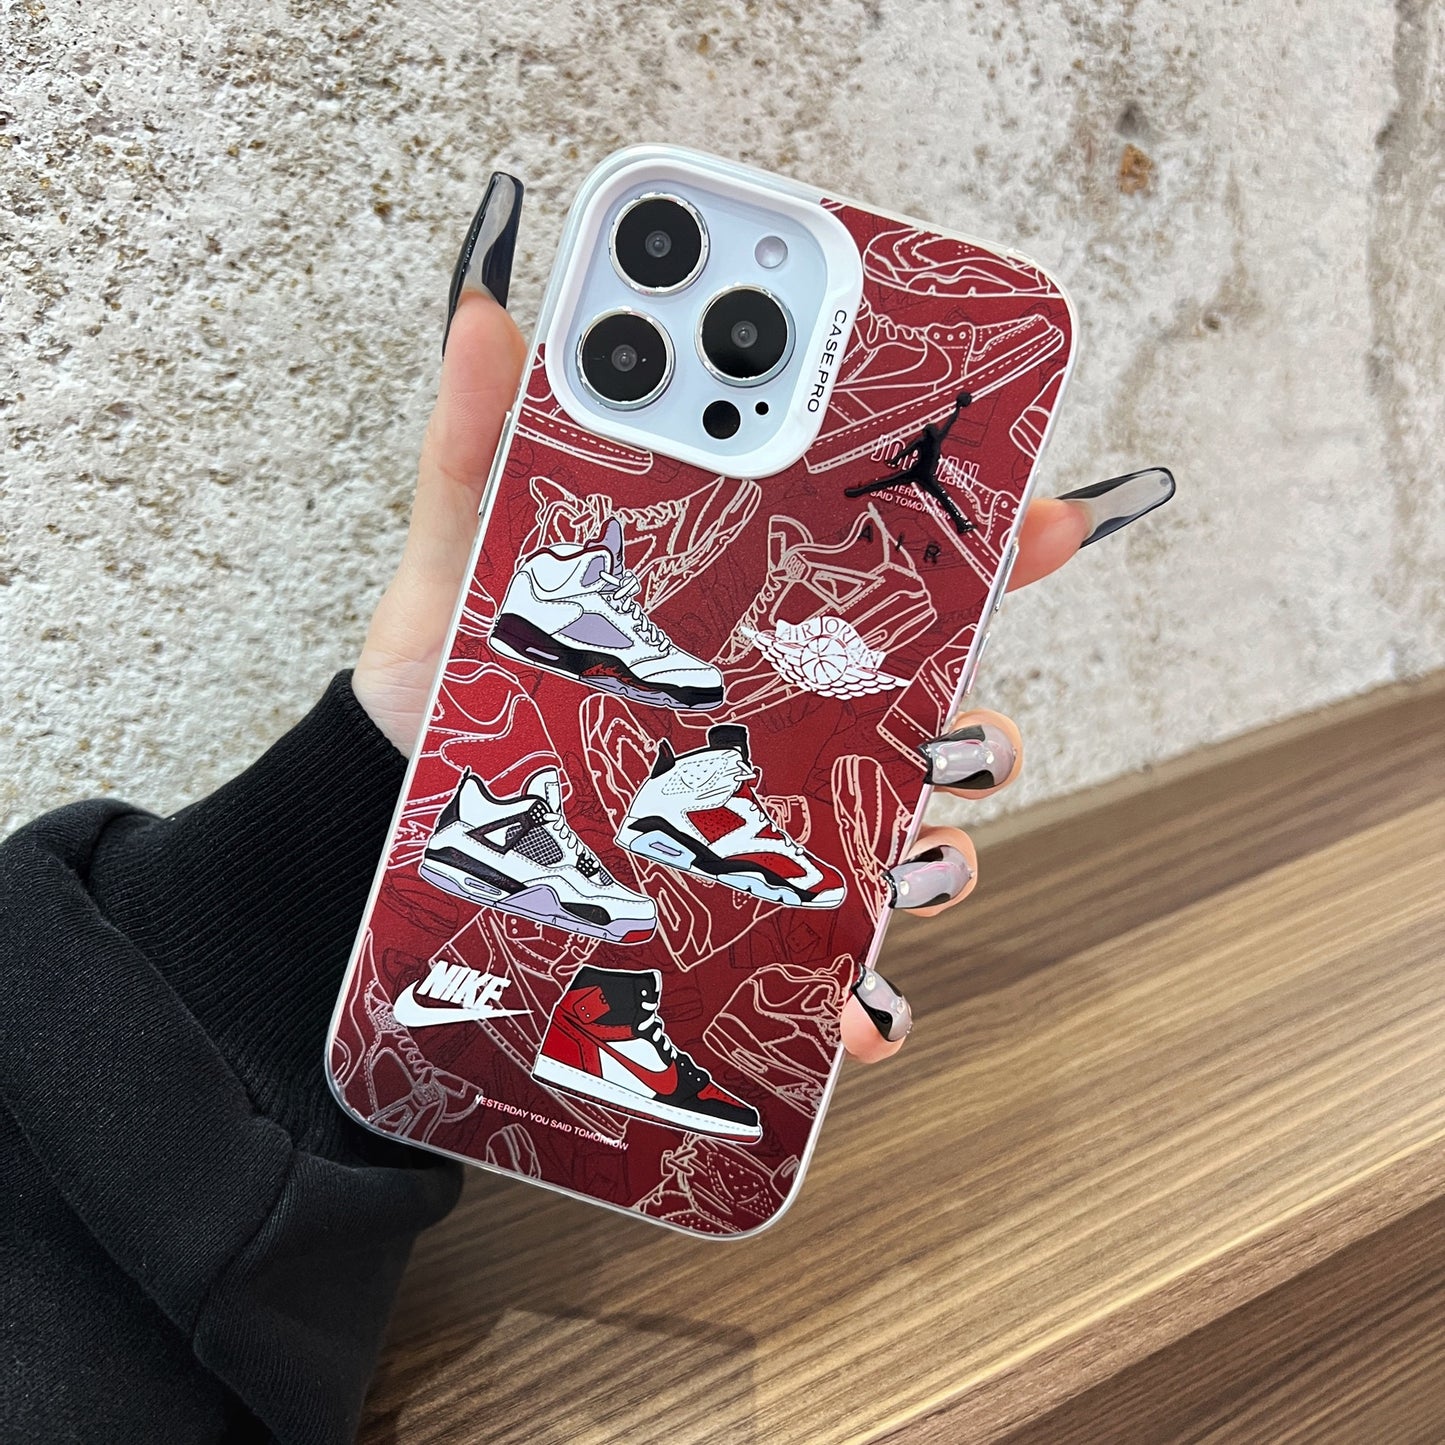 Cactus Jack or Red Sneakers iPhone Case